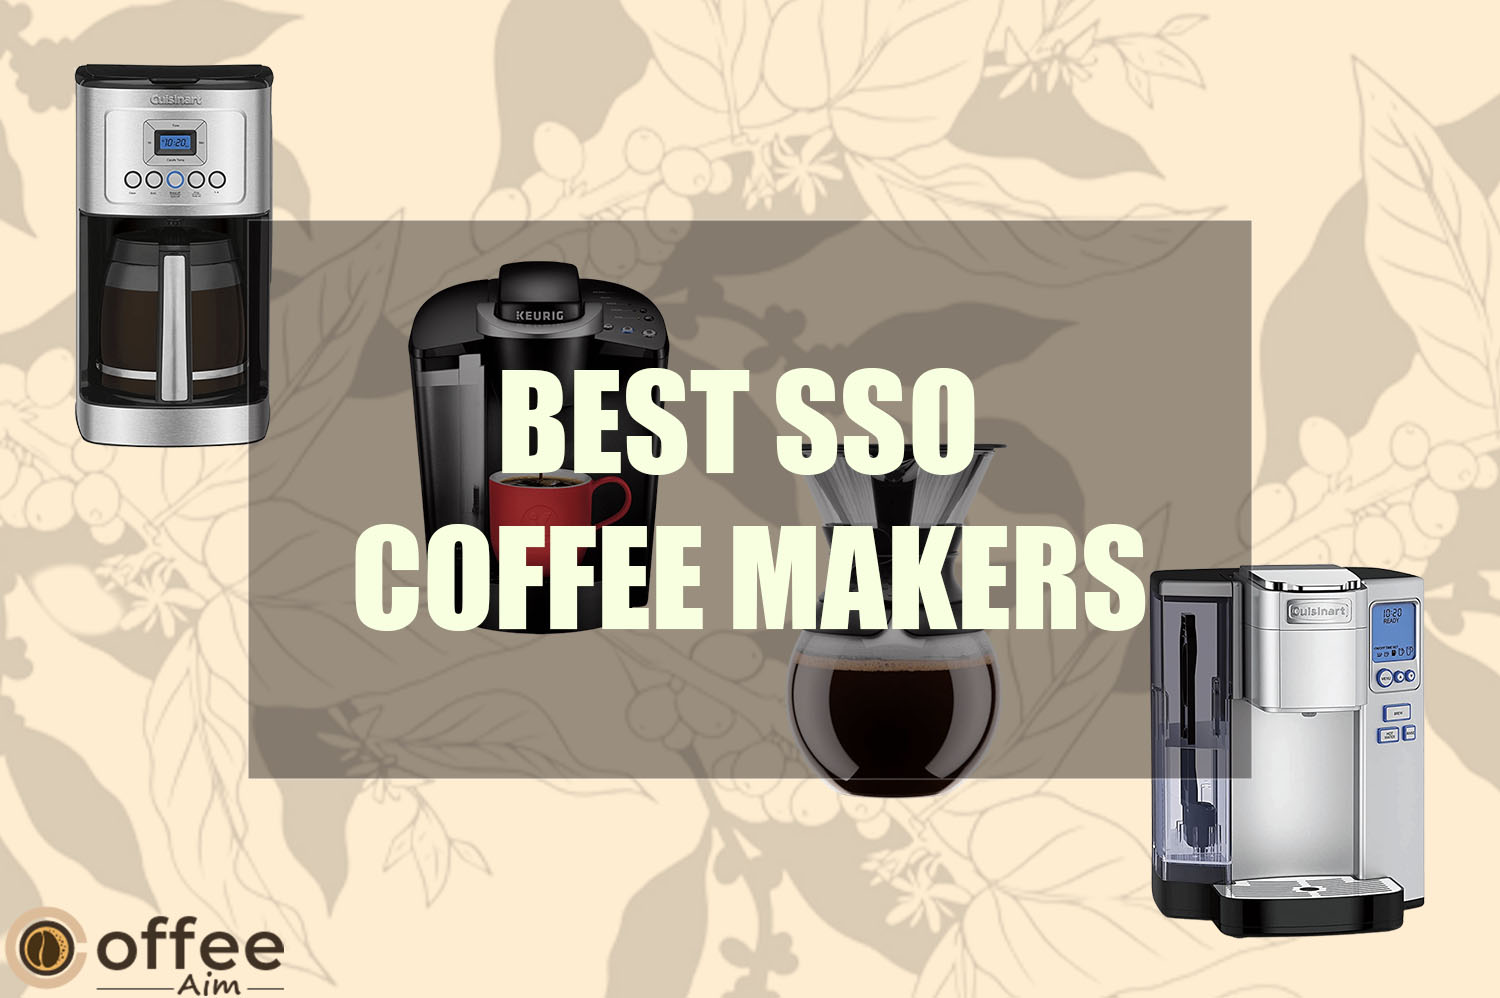 Feature image for the article "Best SSO Coffee Makers"